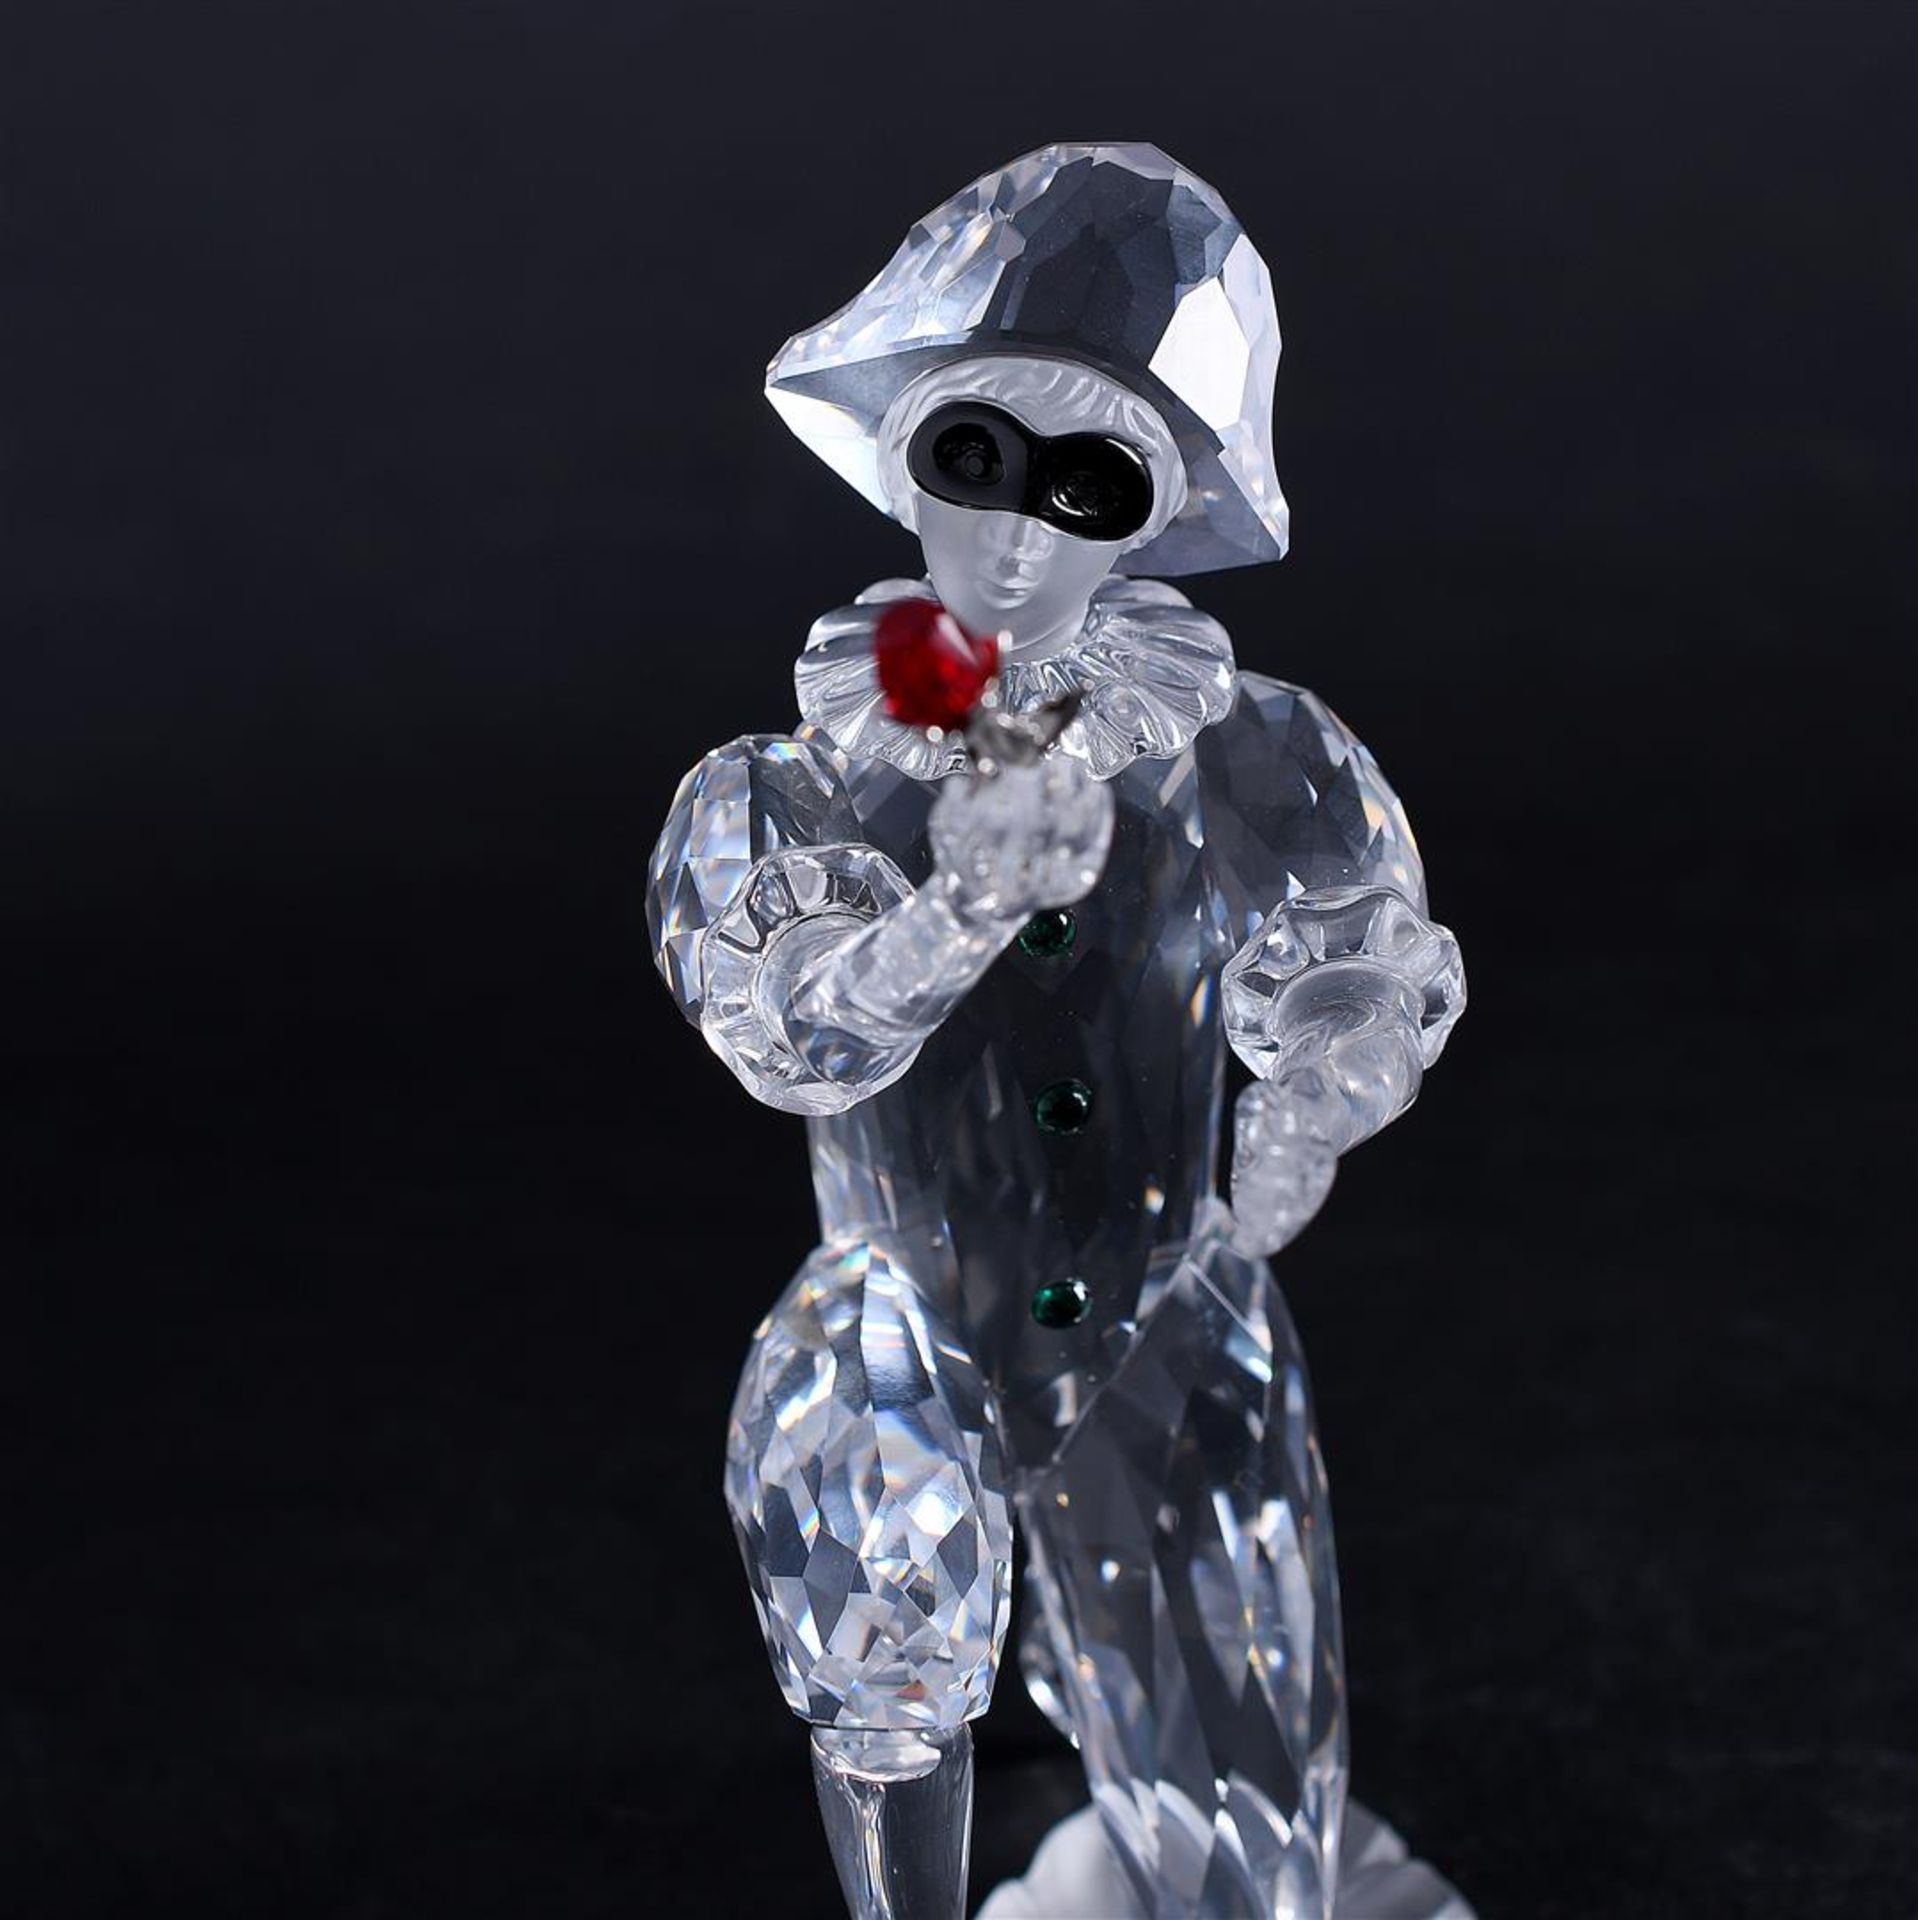 Swarovski SCS, annual edition 2001 harlequin, Year of issue 2001, 254044. Includes original box.
H.  - Image 3 of 7